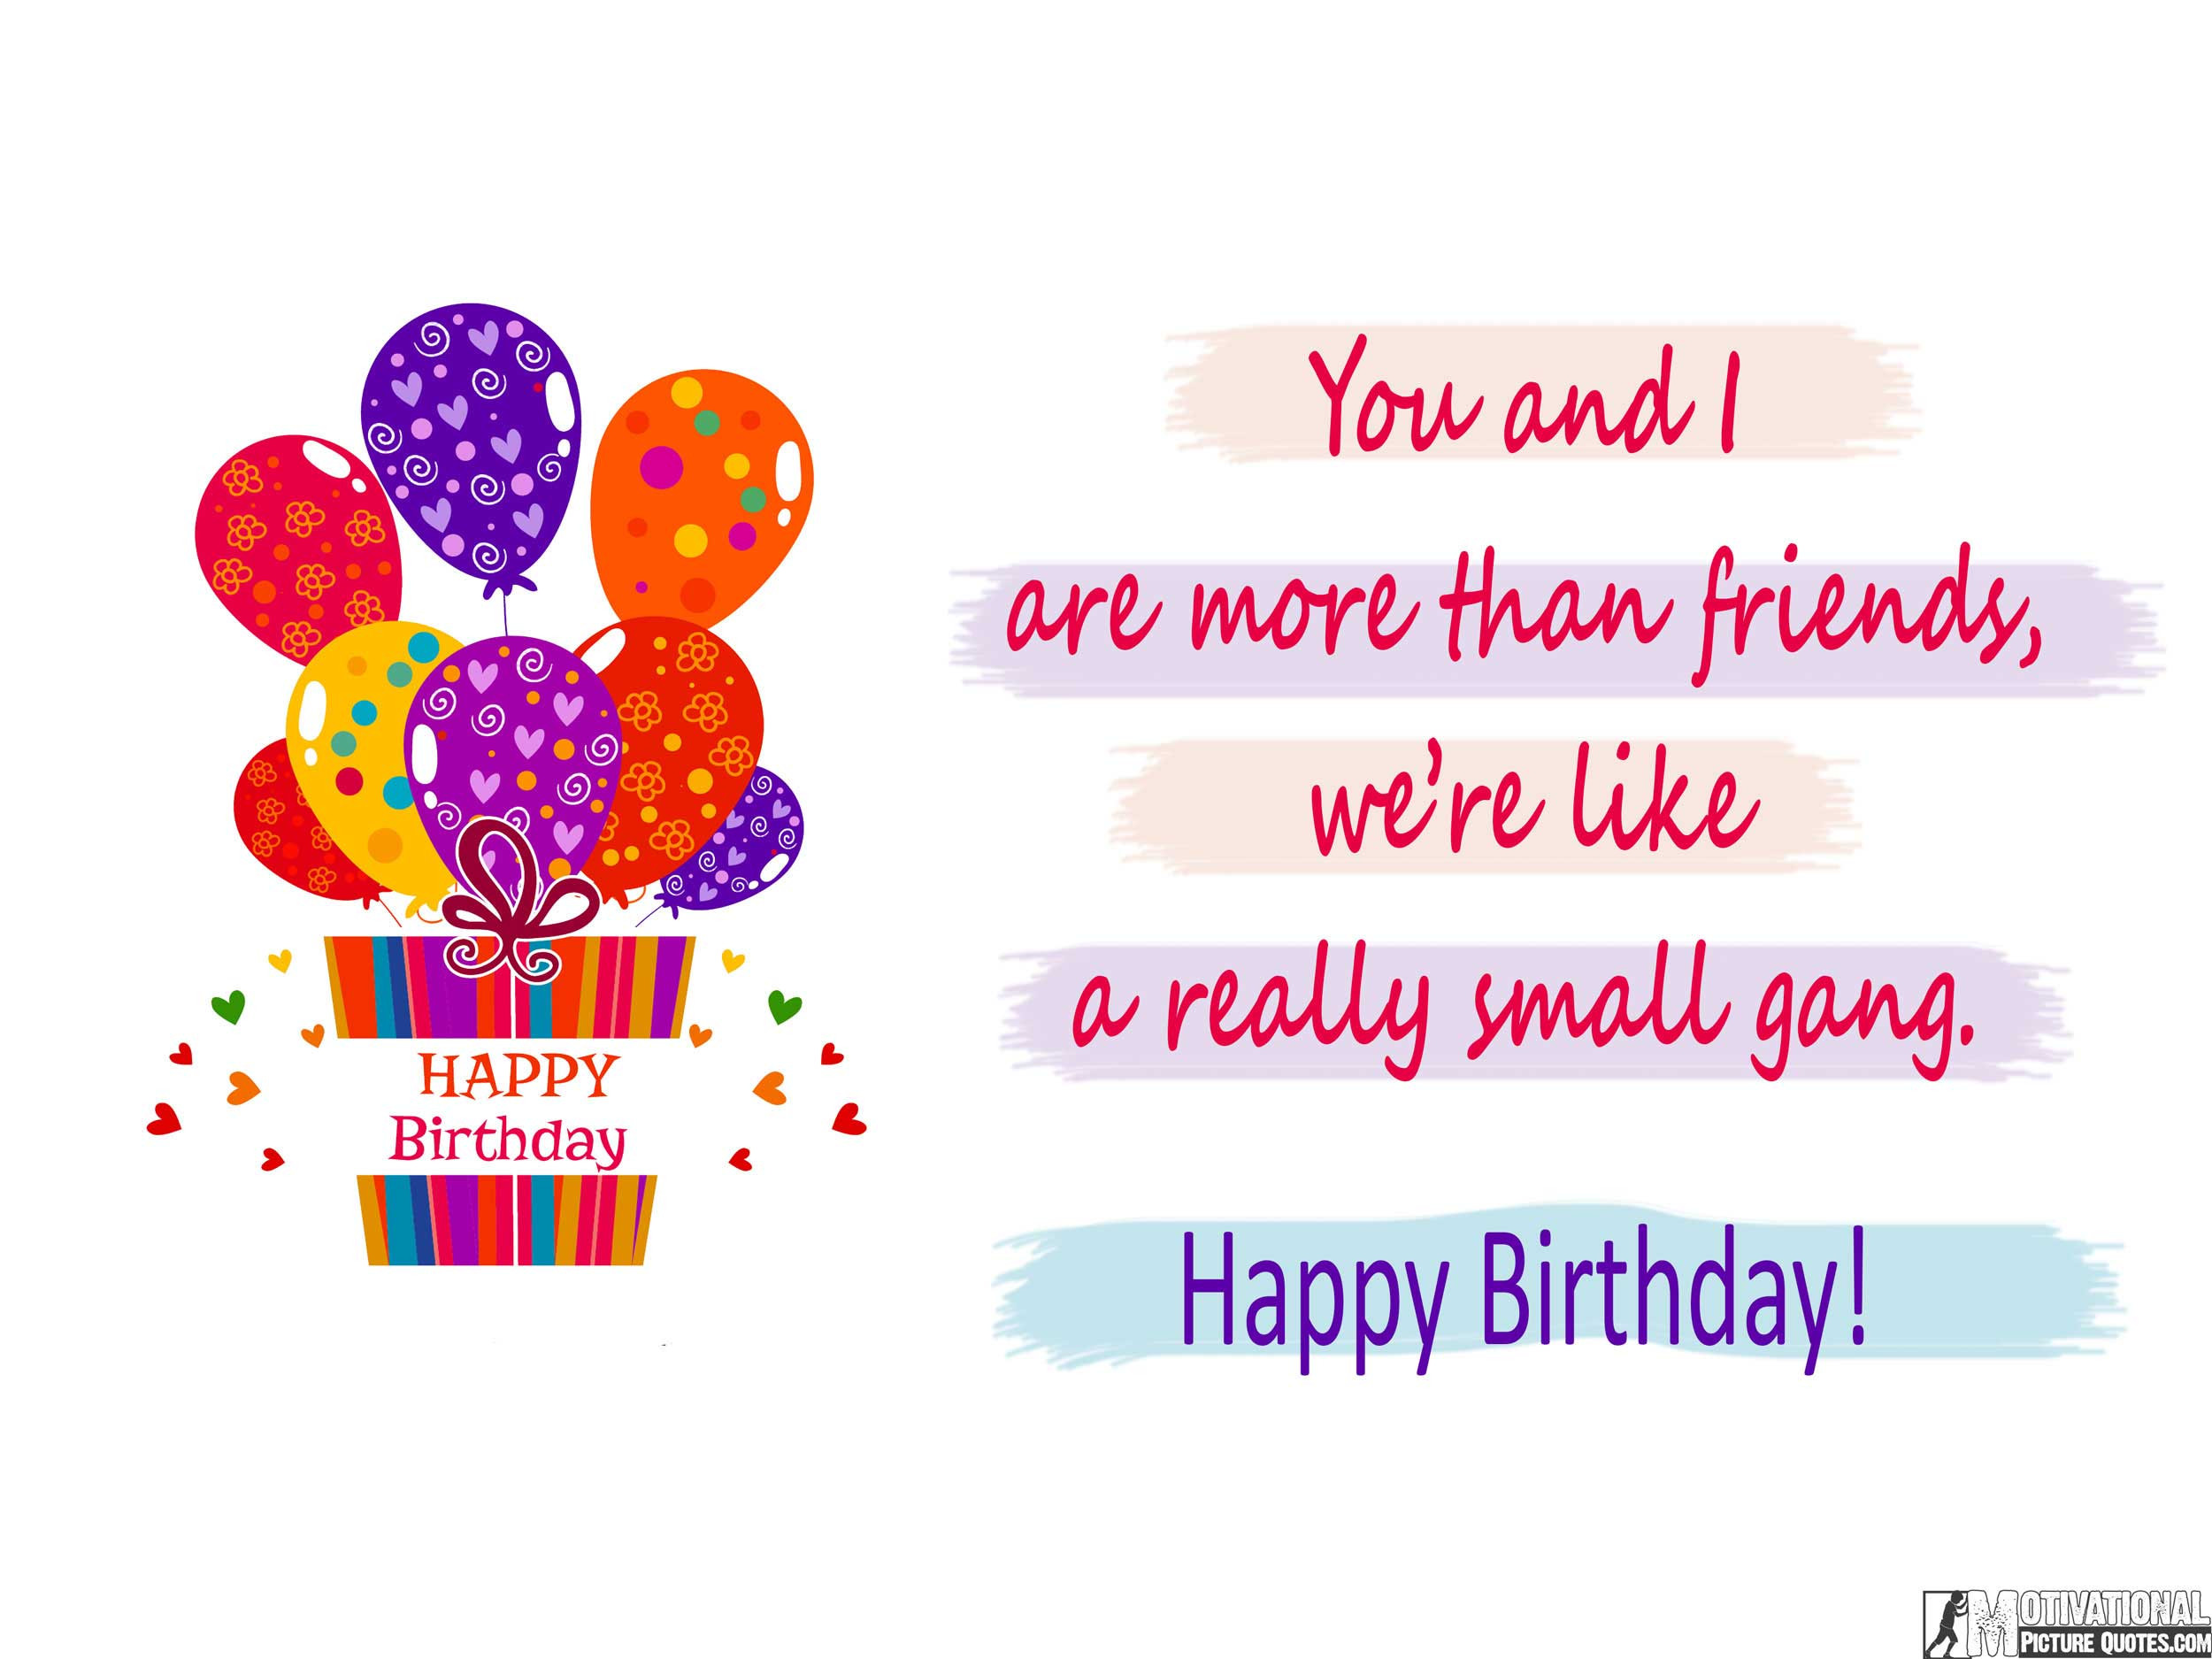 Friend Quotes For Birthday
 35 Inspirational Birthday Quotes